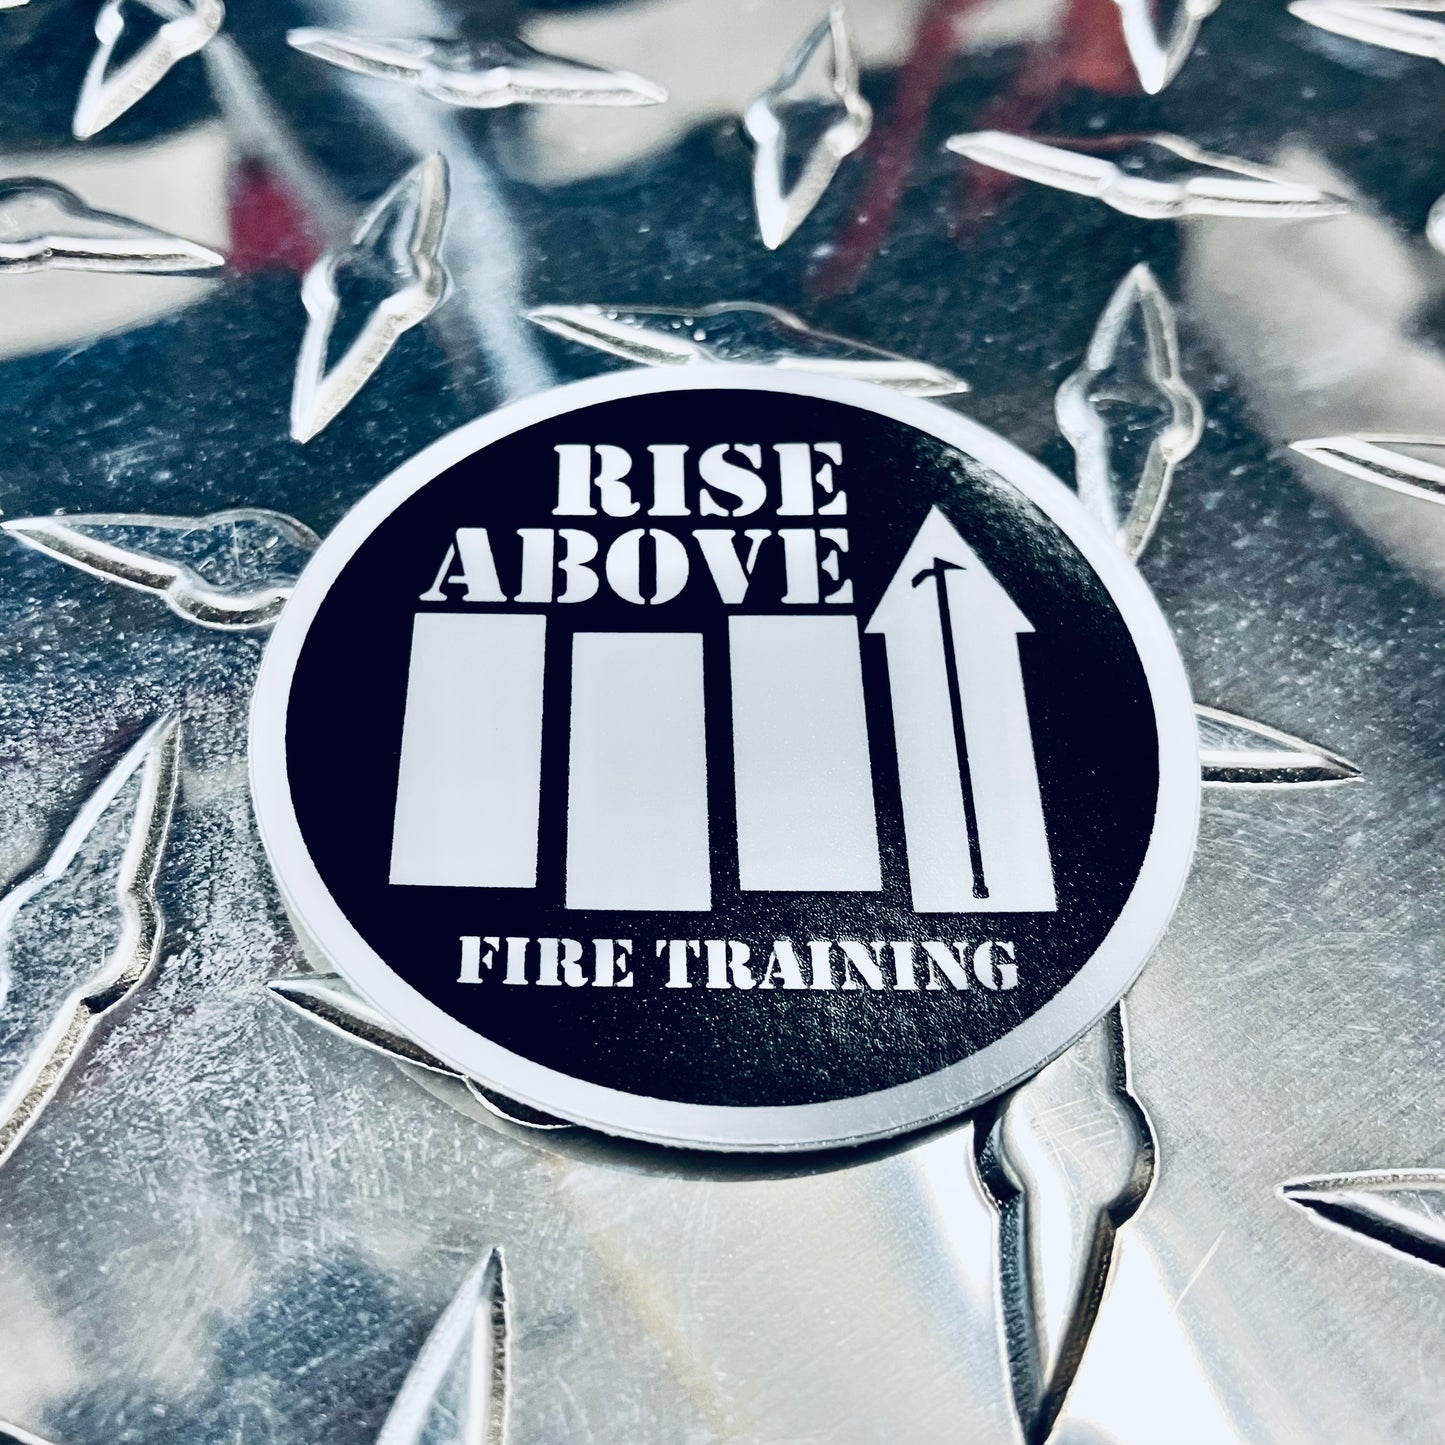 RISE ABOVE 2" Helmet Stickers (set of 5)